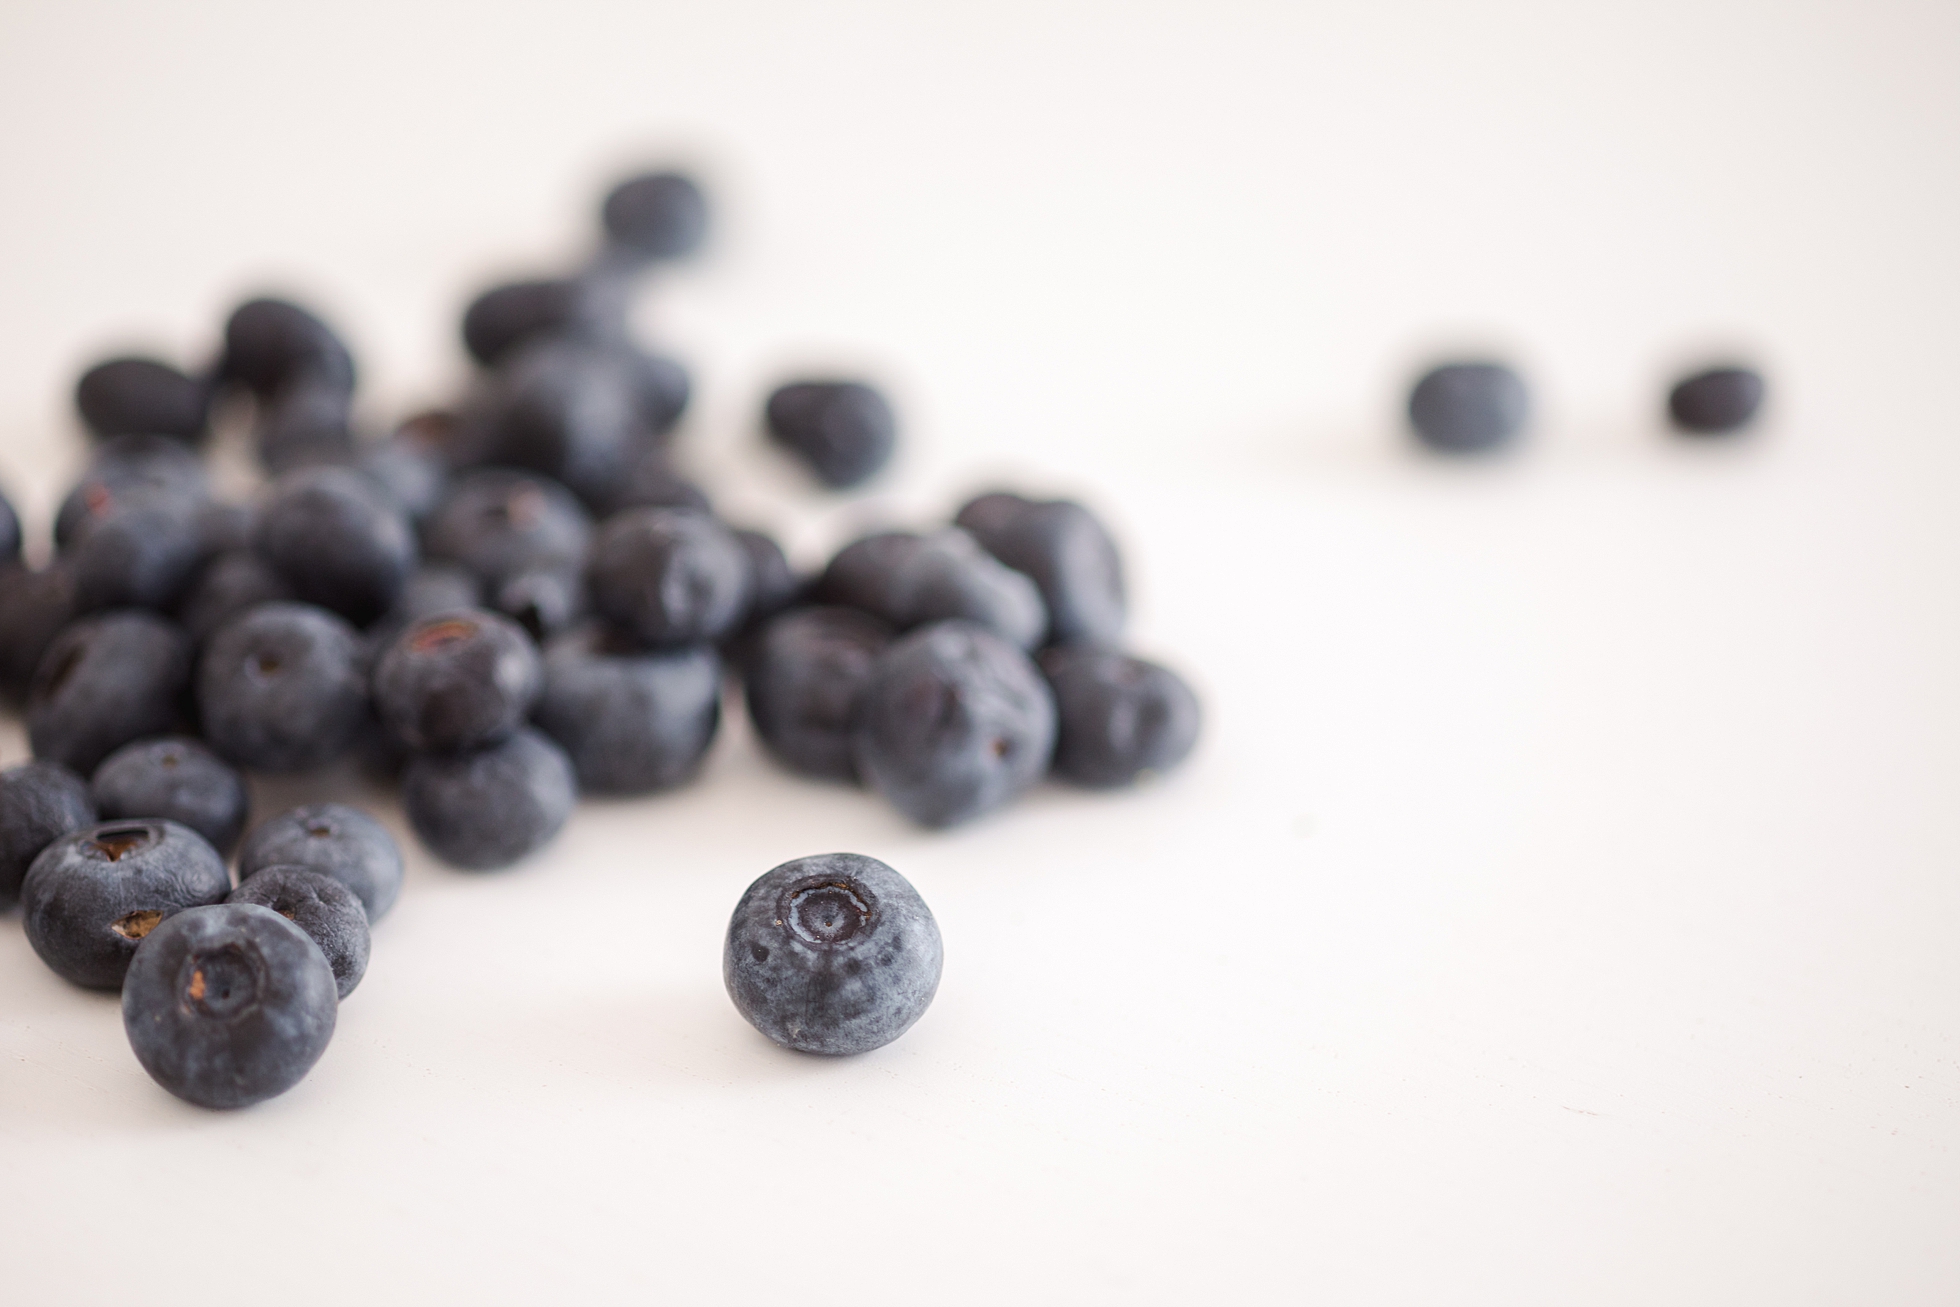 Healthy blueberries scattered